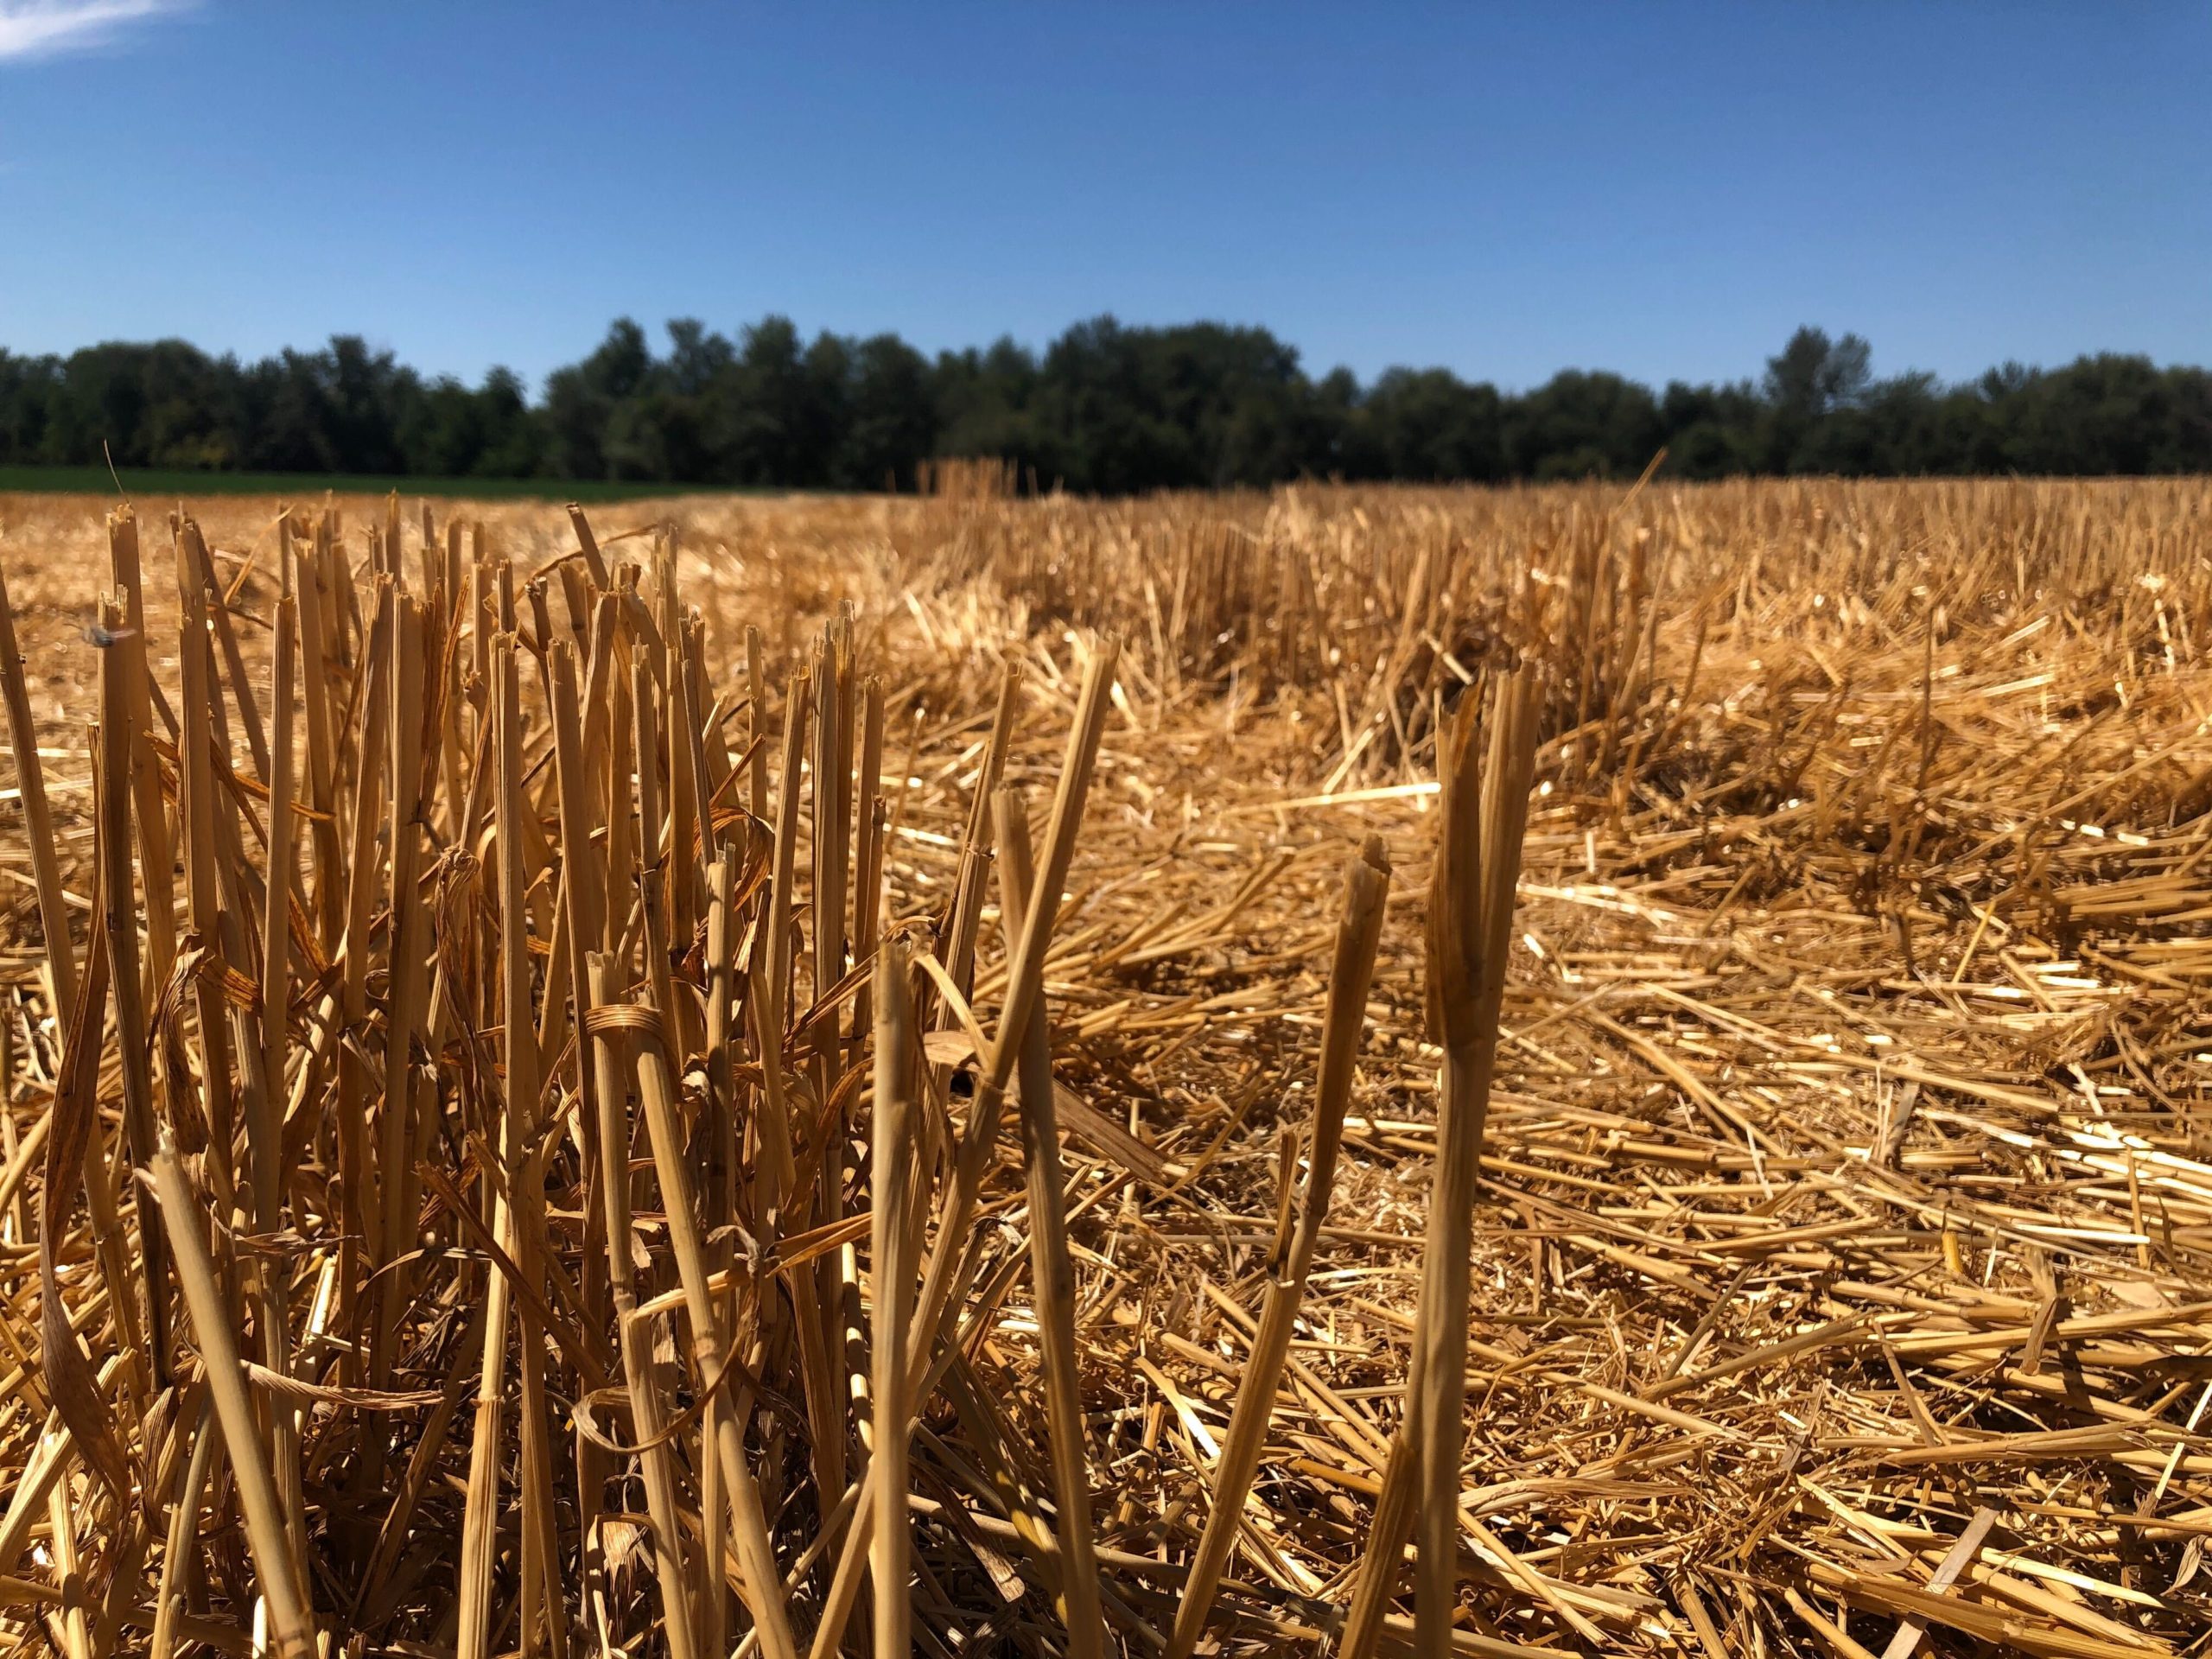 Golden wheat got a recent crew cut outside of Walla Walla, Washington. Experts say the 2020 Washington and Oregon crops look about average, saved by late-spring rains.